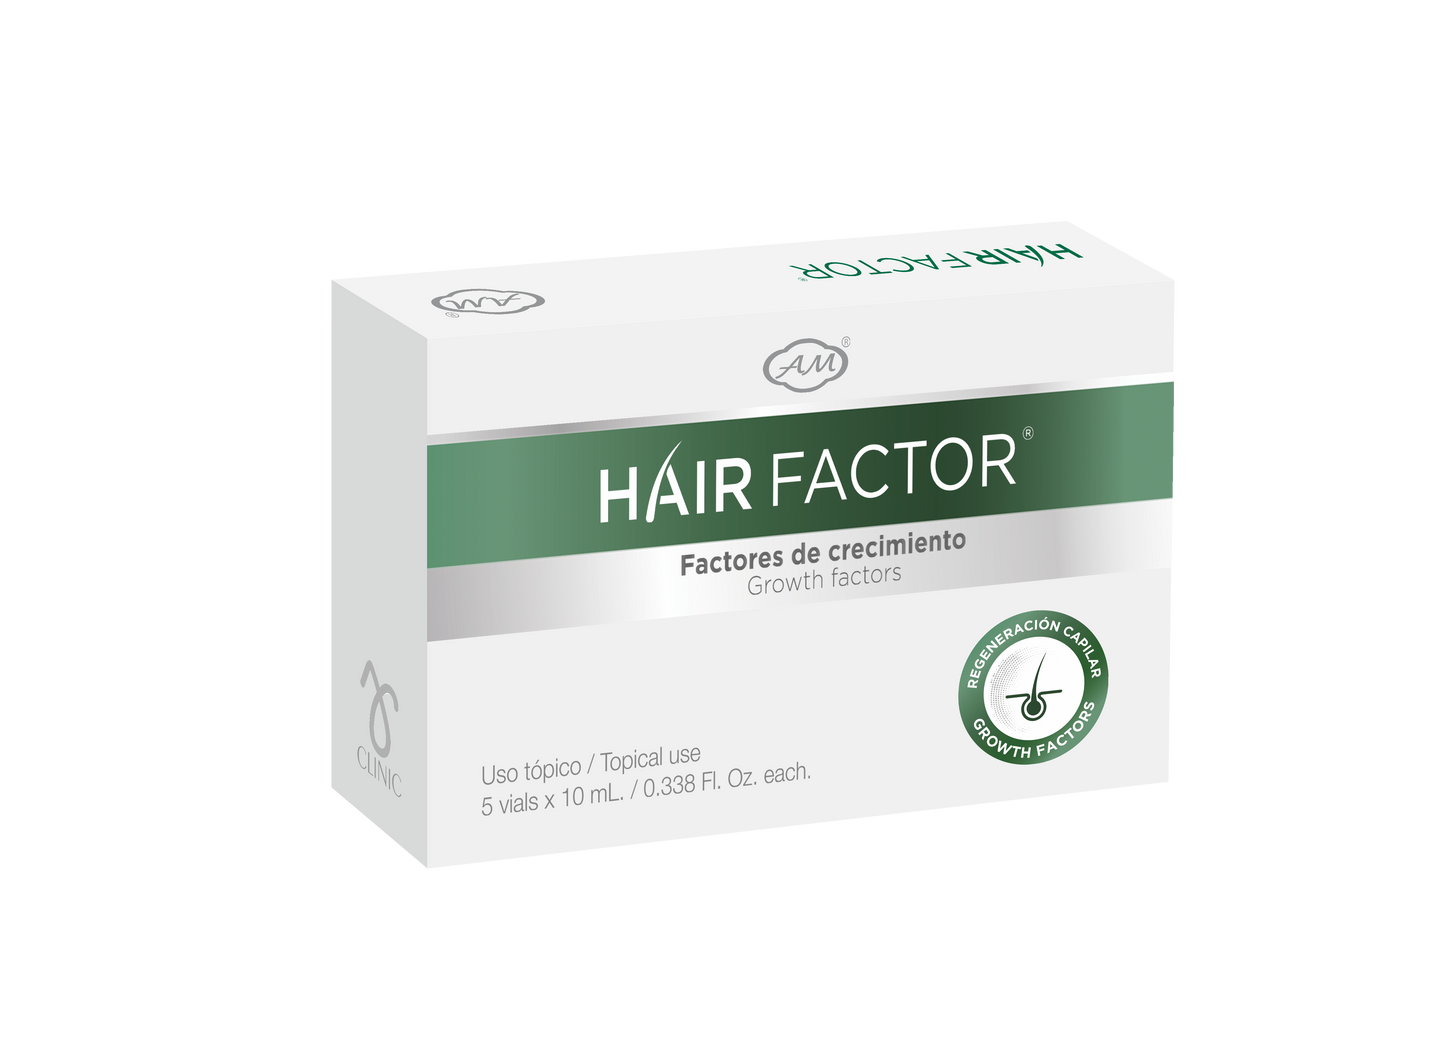 Growth  Factors that helps improve alopecia. Strengthens leather. 